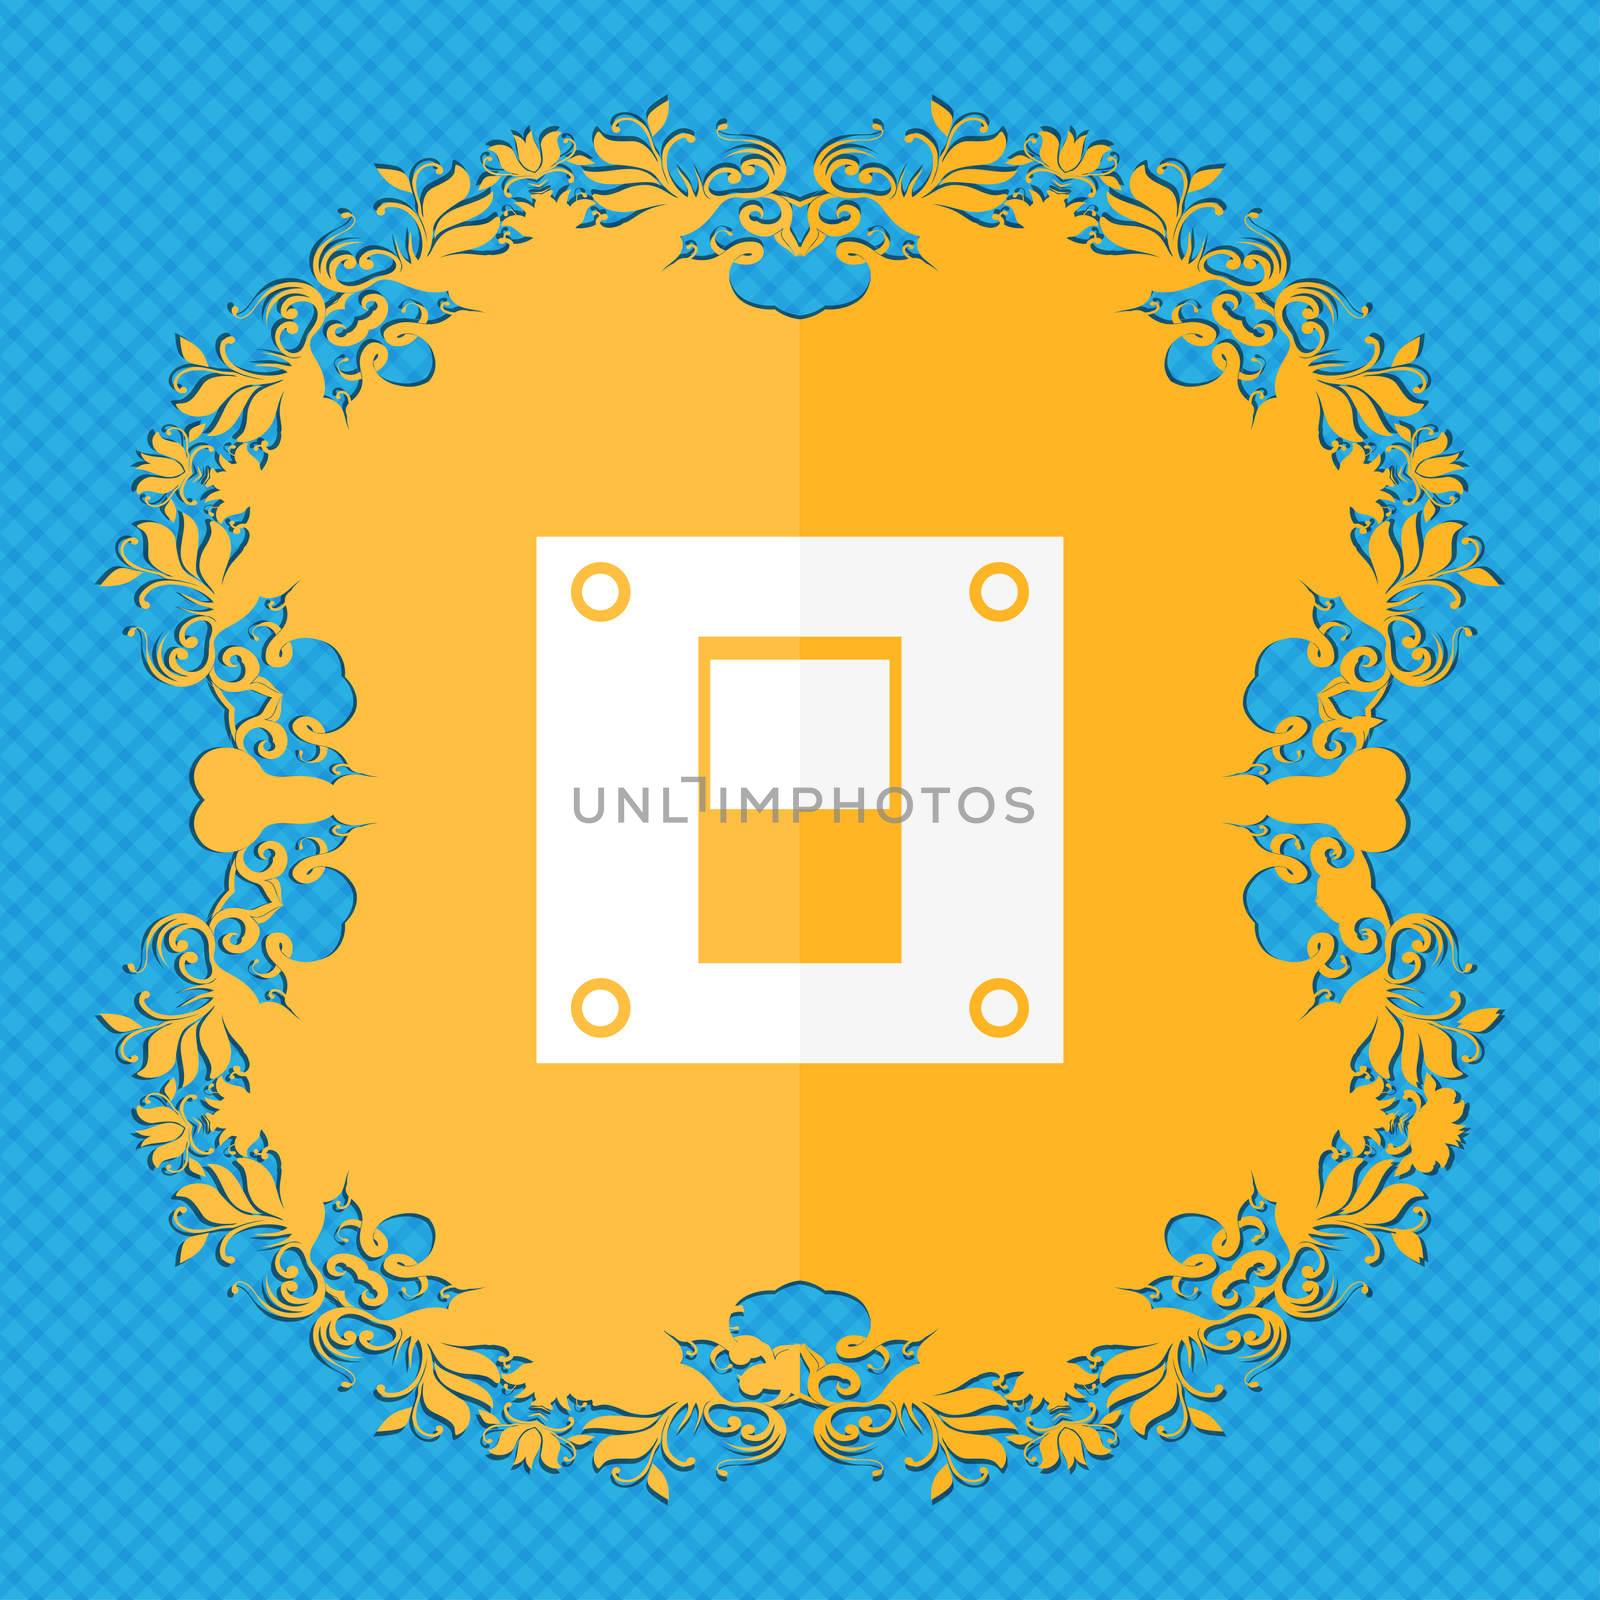 Power switch icon sign. Floral flat design on a blue abstract background with place for your text. illustration